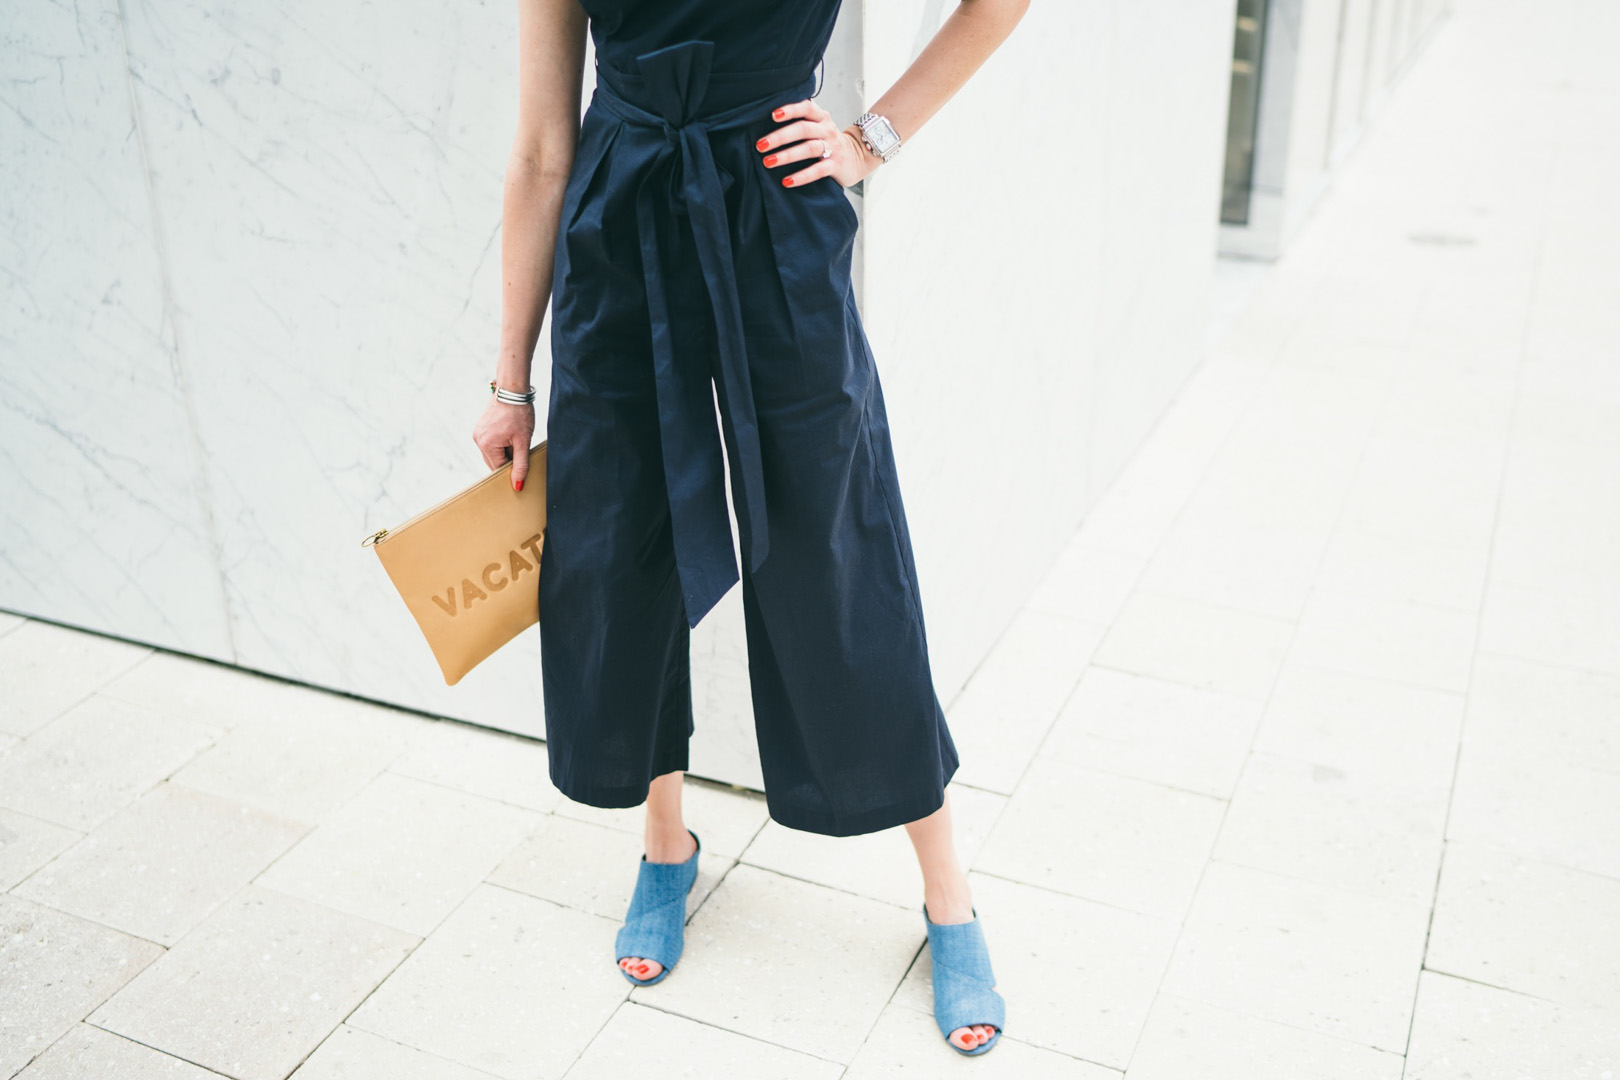 Jackie Roque styling a Chelsea 28 Culotte jumpsuit in Miami.